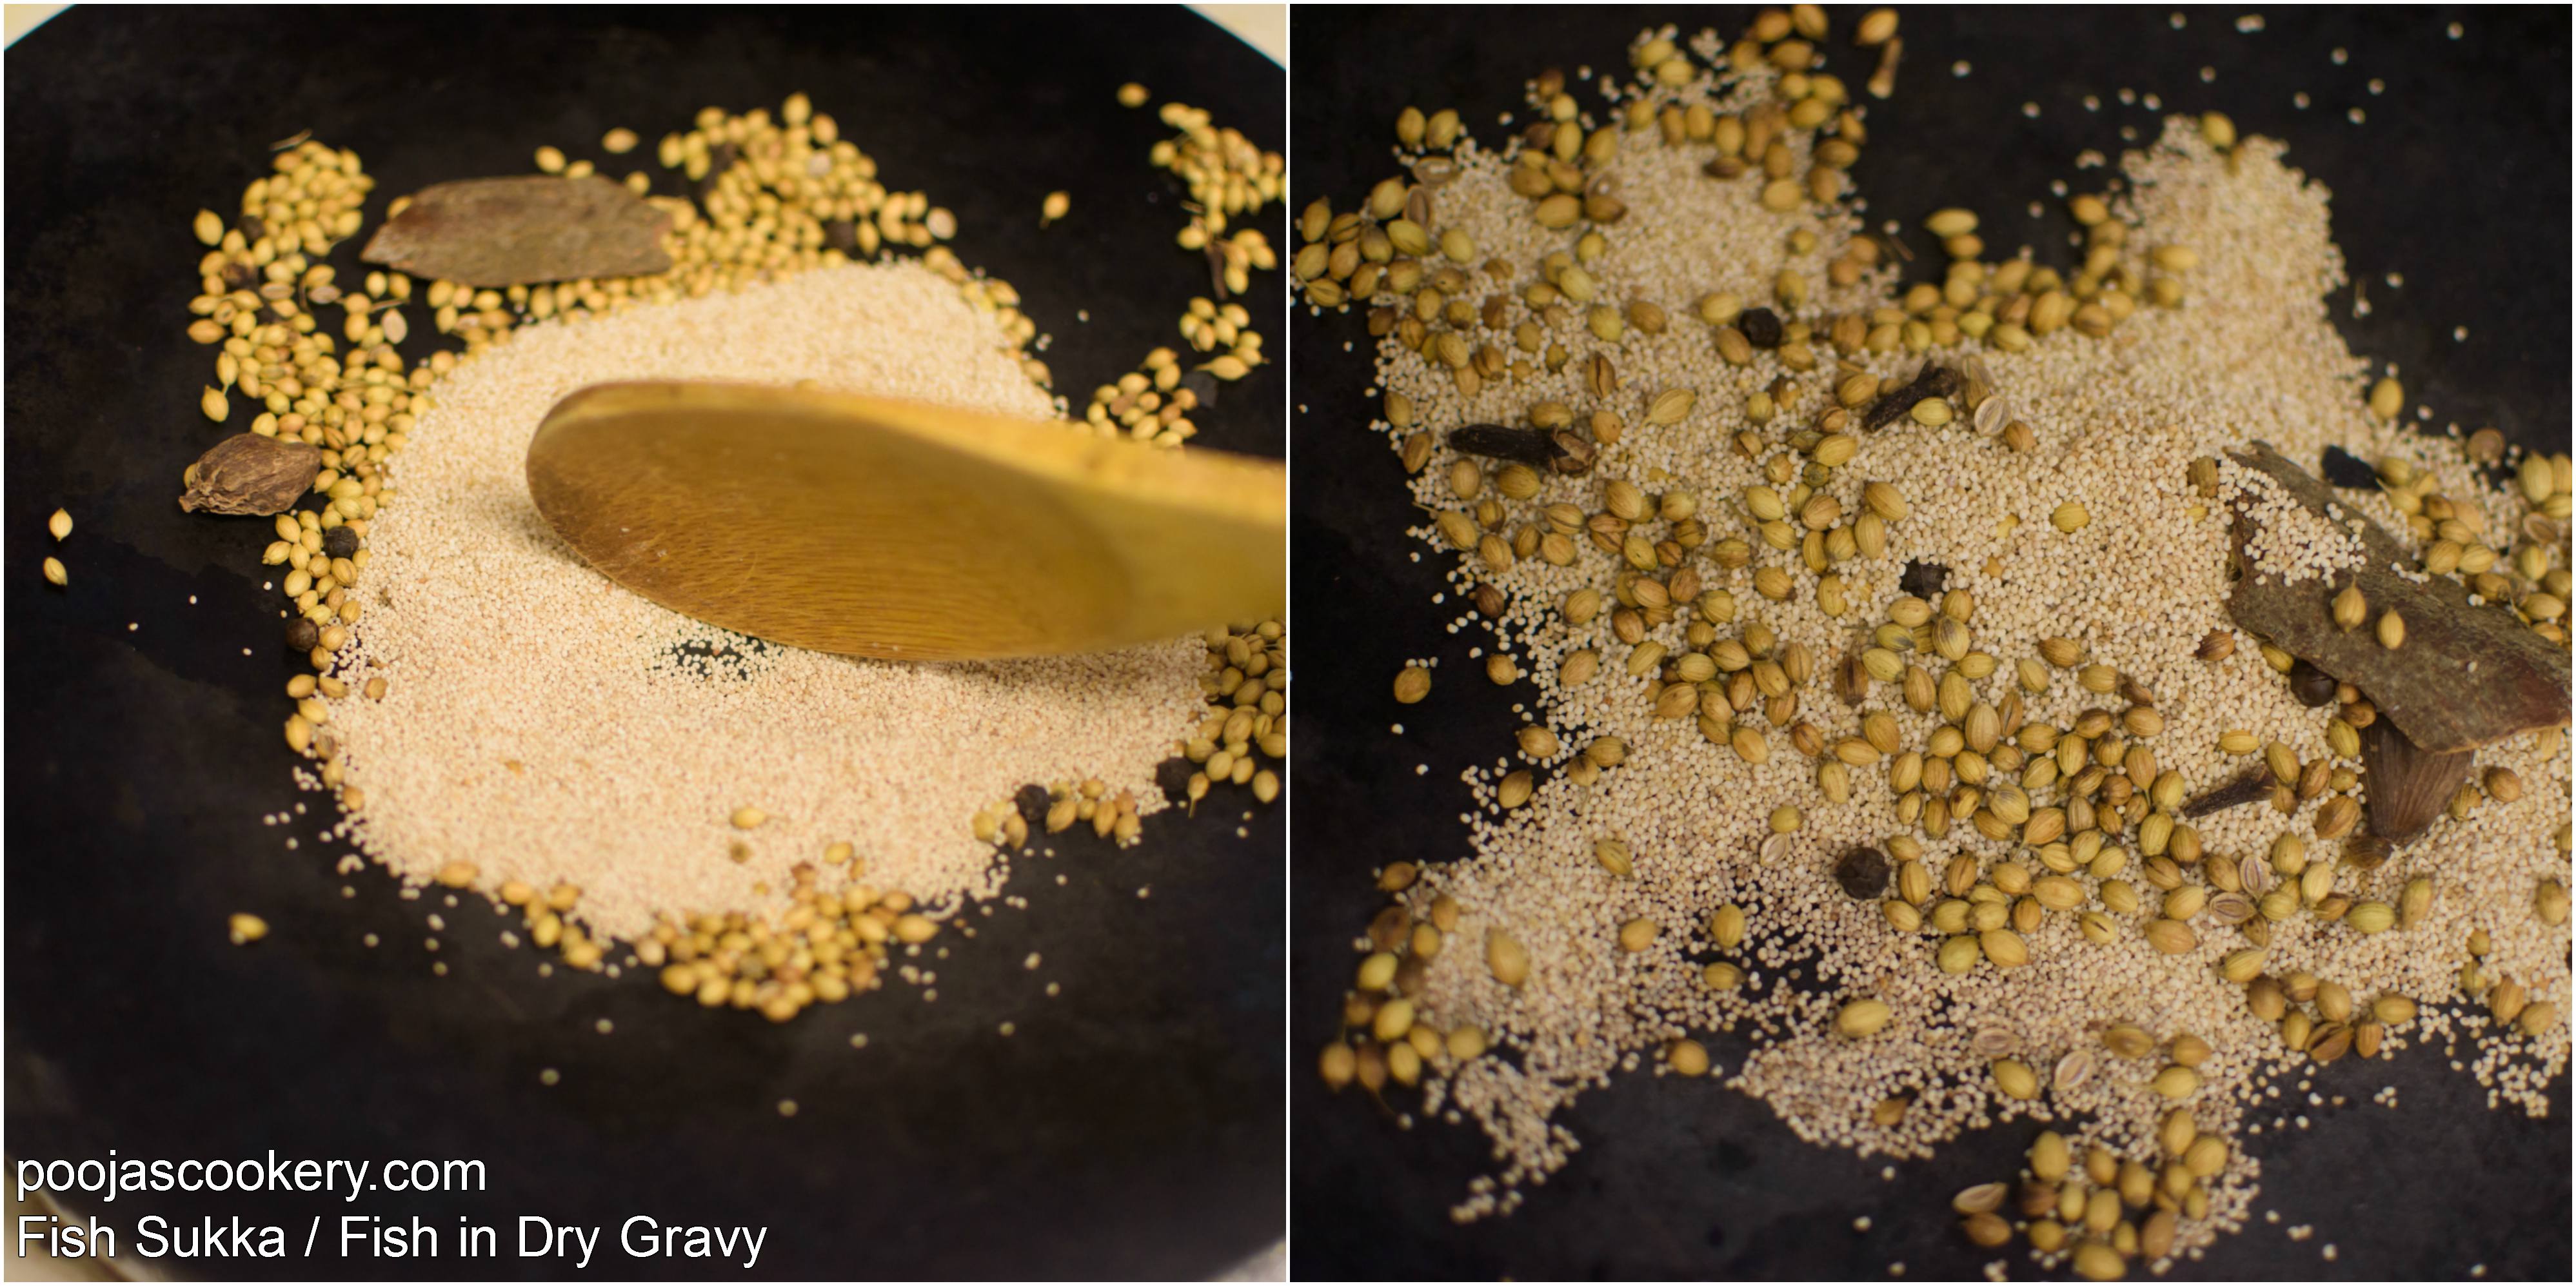 Spices dry roasted | poojascookery.com